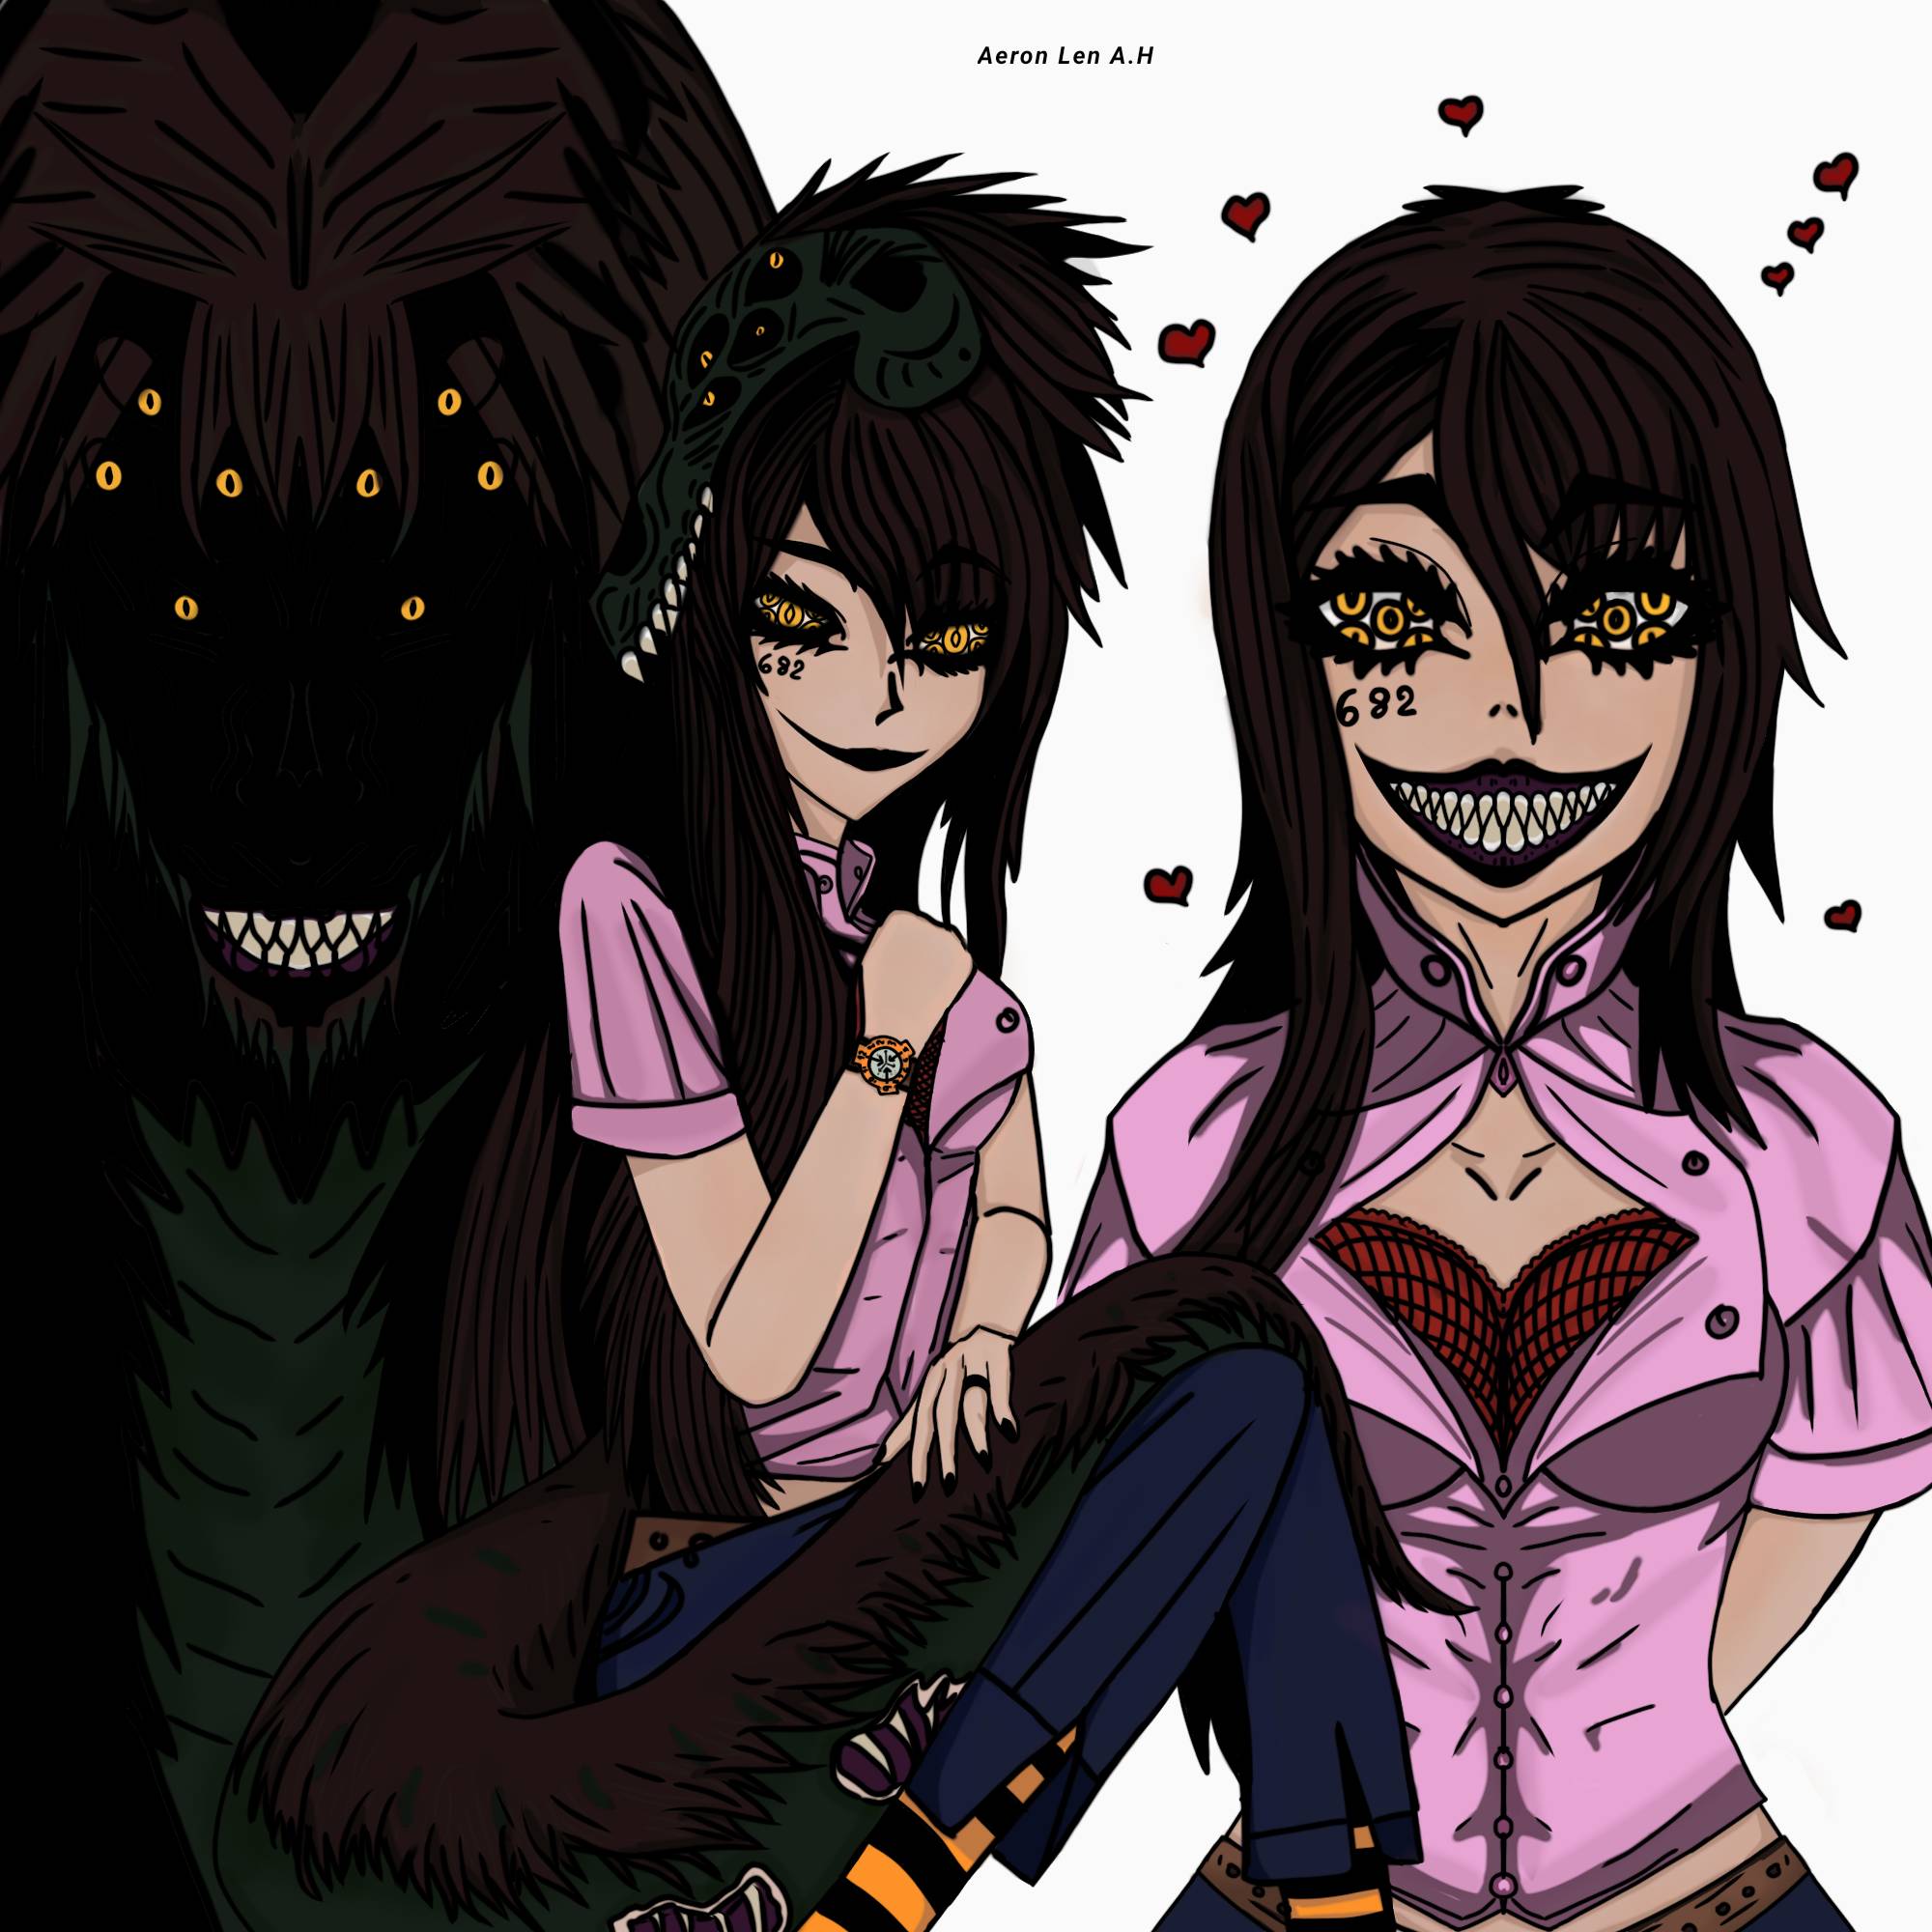 SCP-682 and Kayla Size Comparison by CandiceSCP3015 on DeviantArt